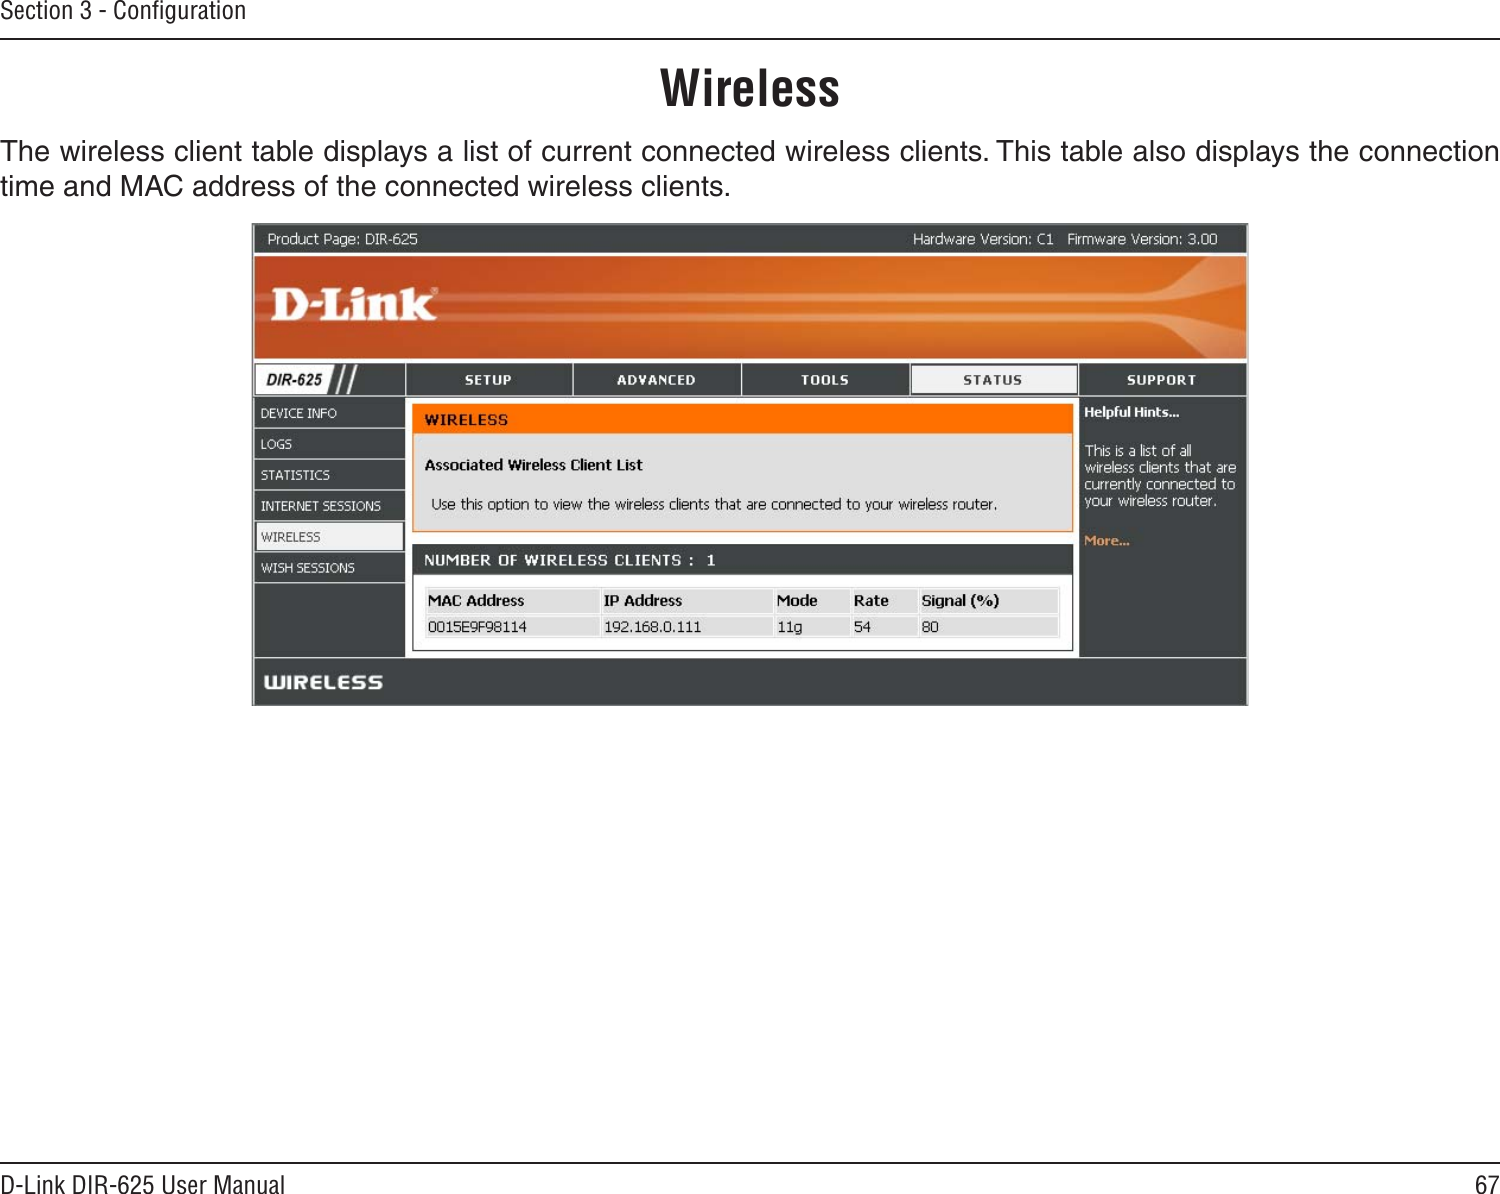 67D-Link DIR-625 User ManualSection 3 - ConﬁgurationThe wireless client table displays a list of current connected wireless clients. This table also displays the connection time and MAC address of the connected wireless clients.Wireless